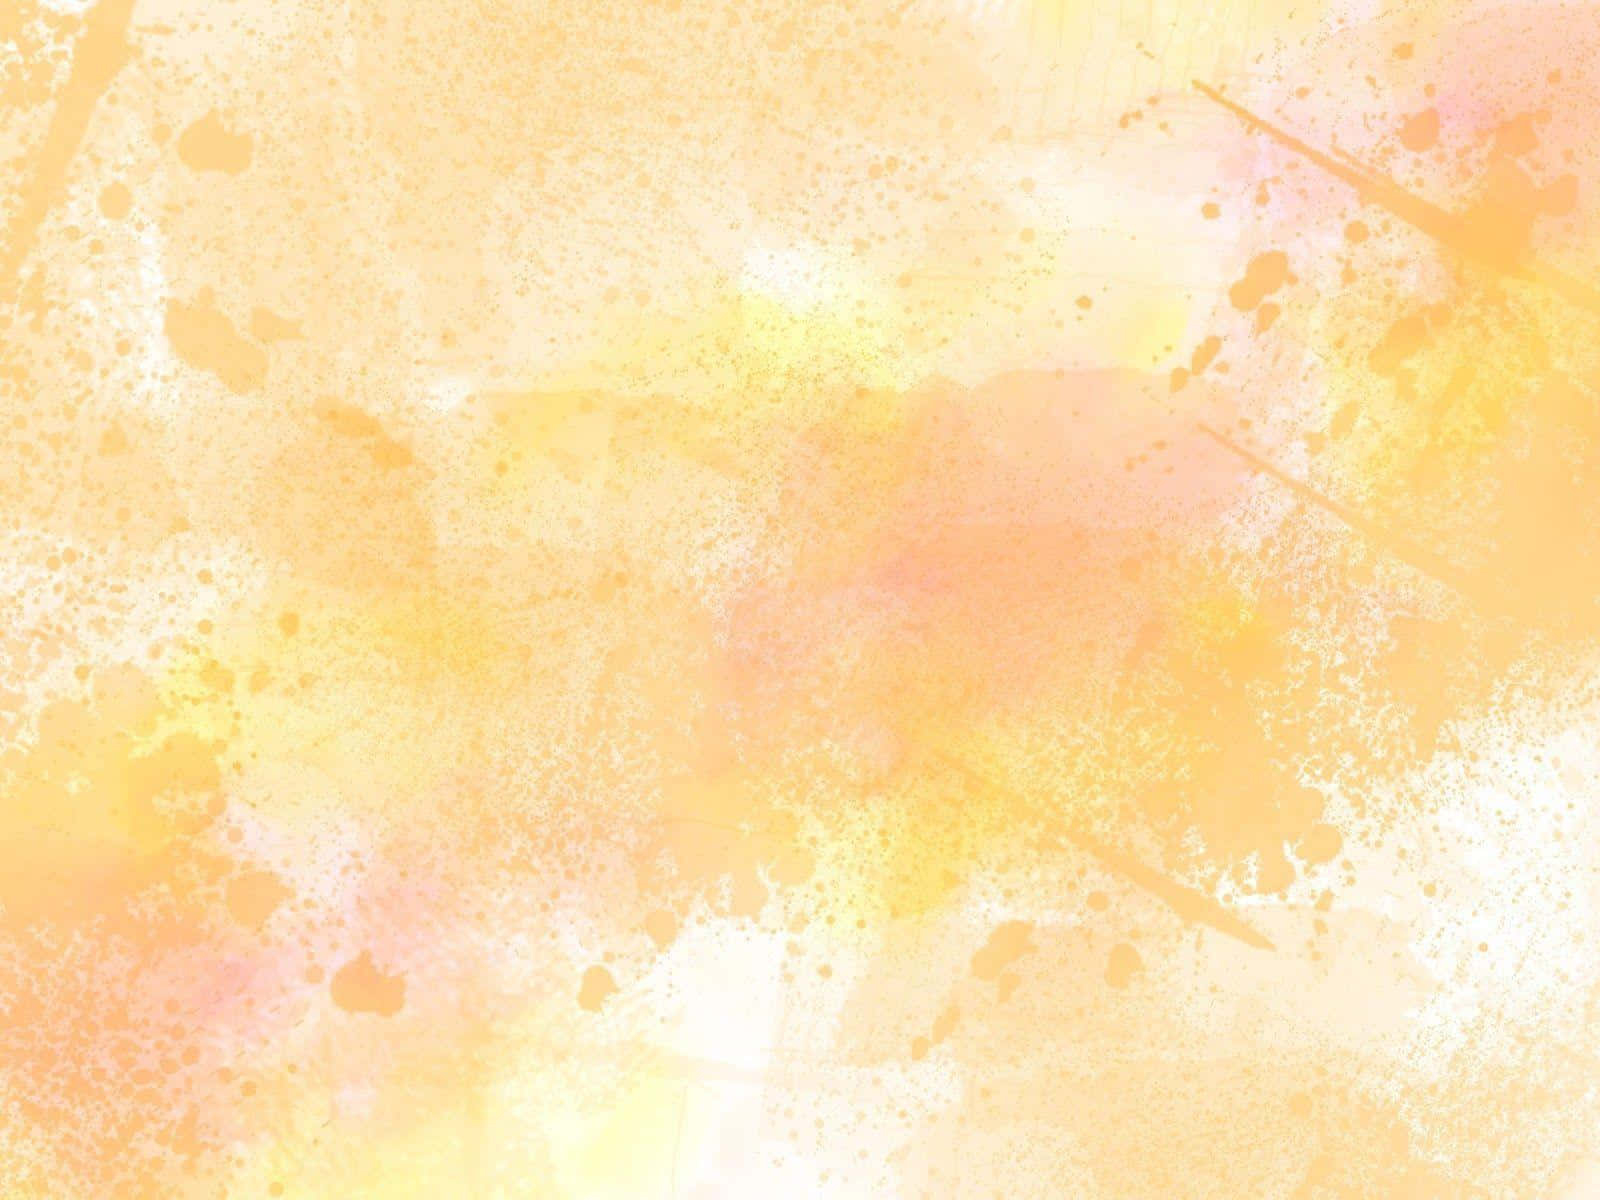 A Watercolor Background With Yellow And Orange Paint